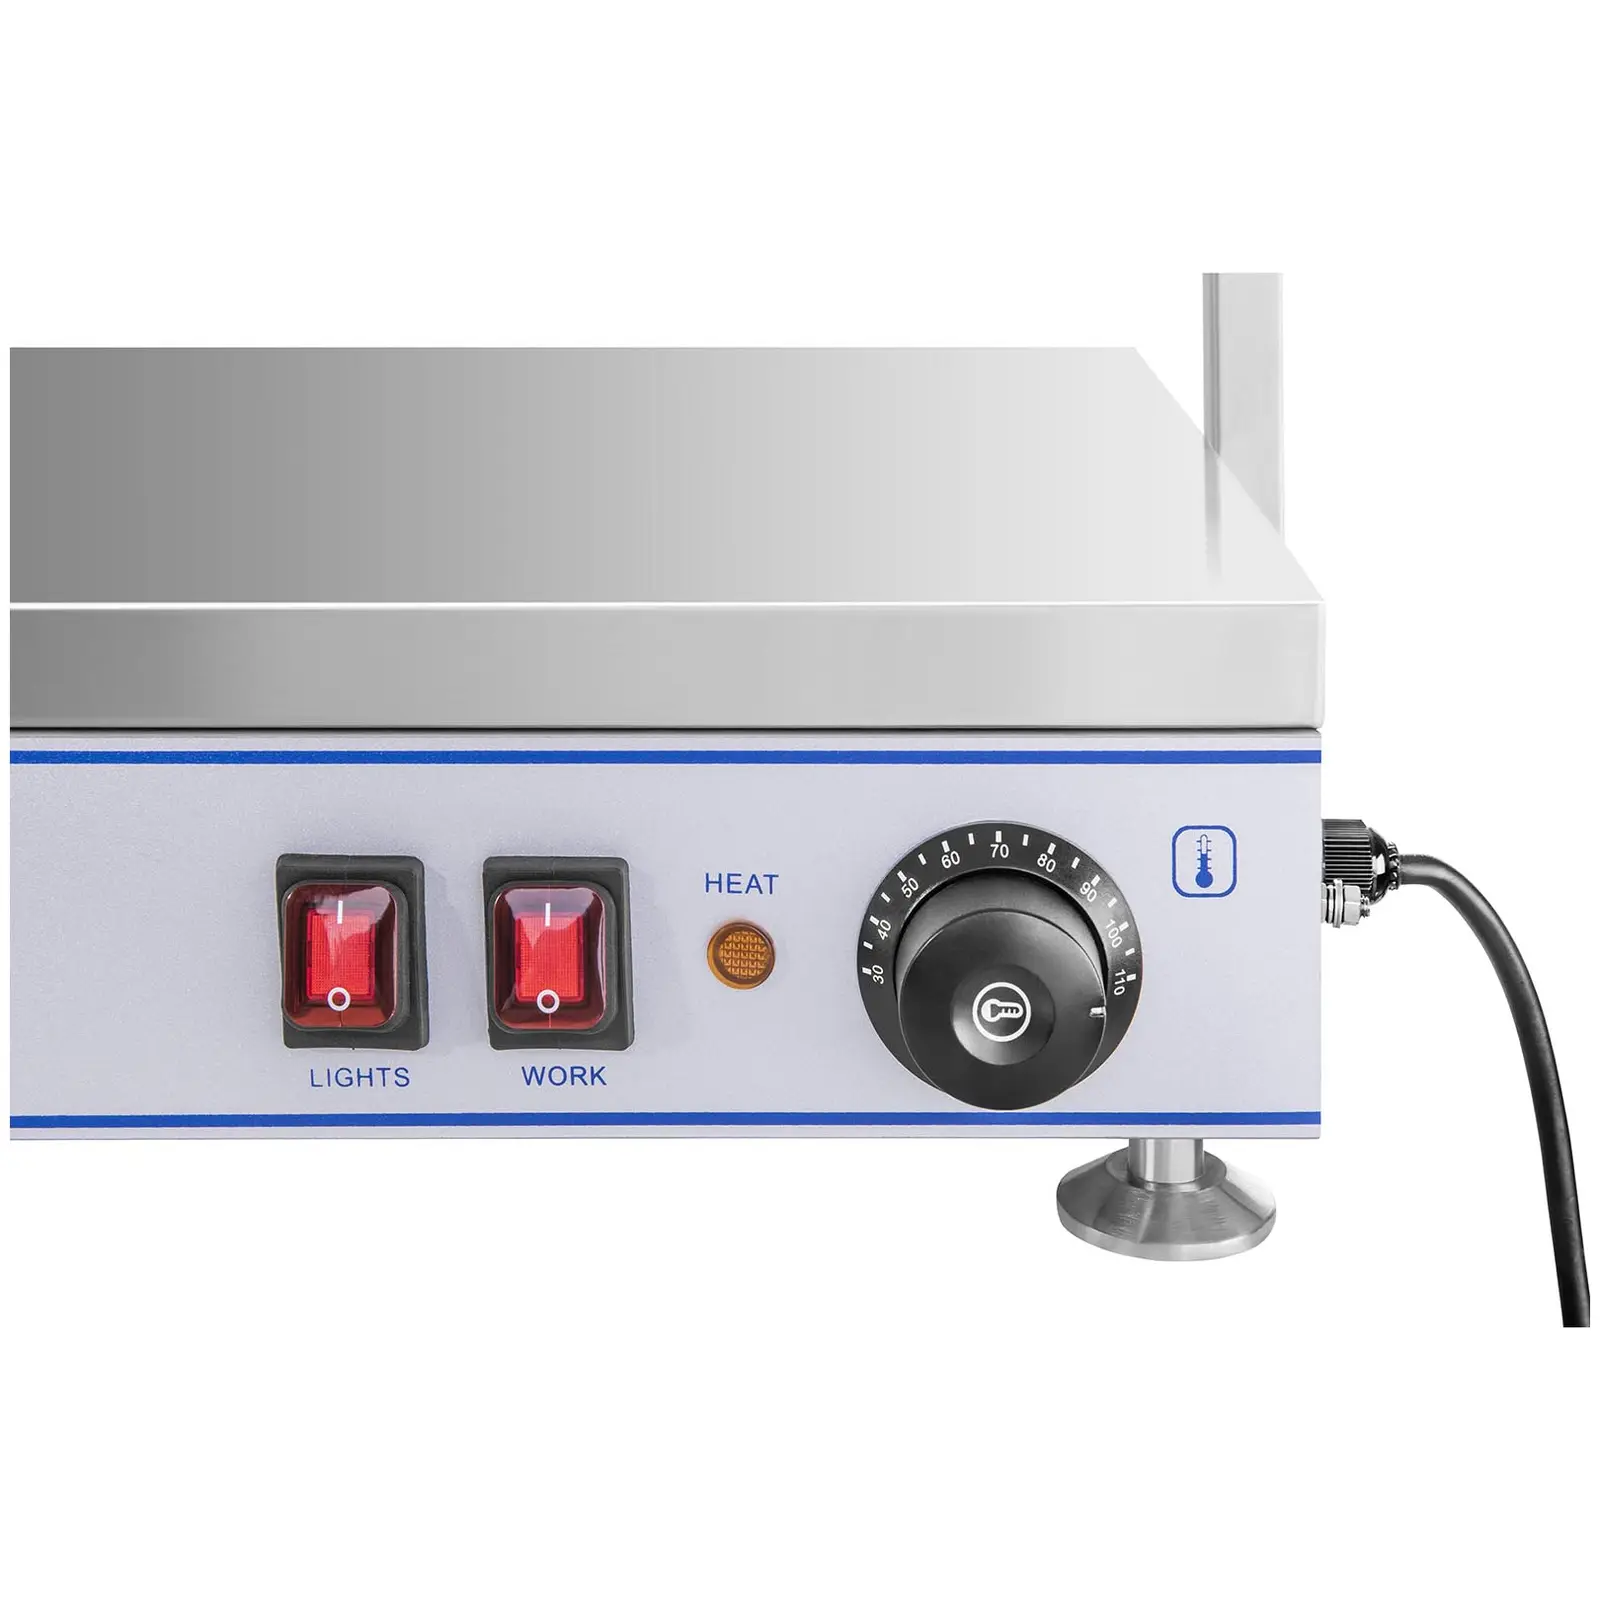 Electric Hot Plate - 3 halogen lamps - 1,550 W